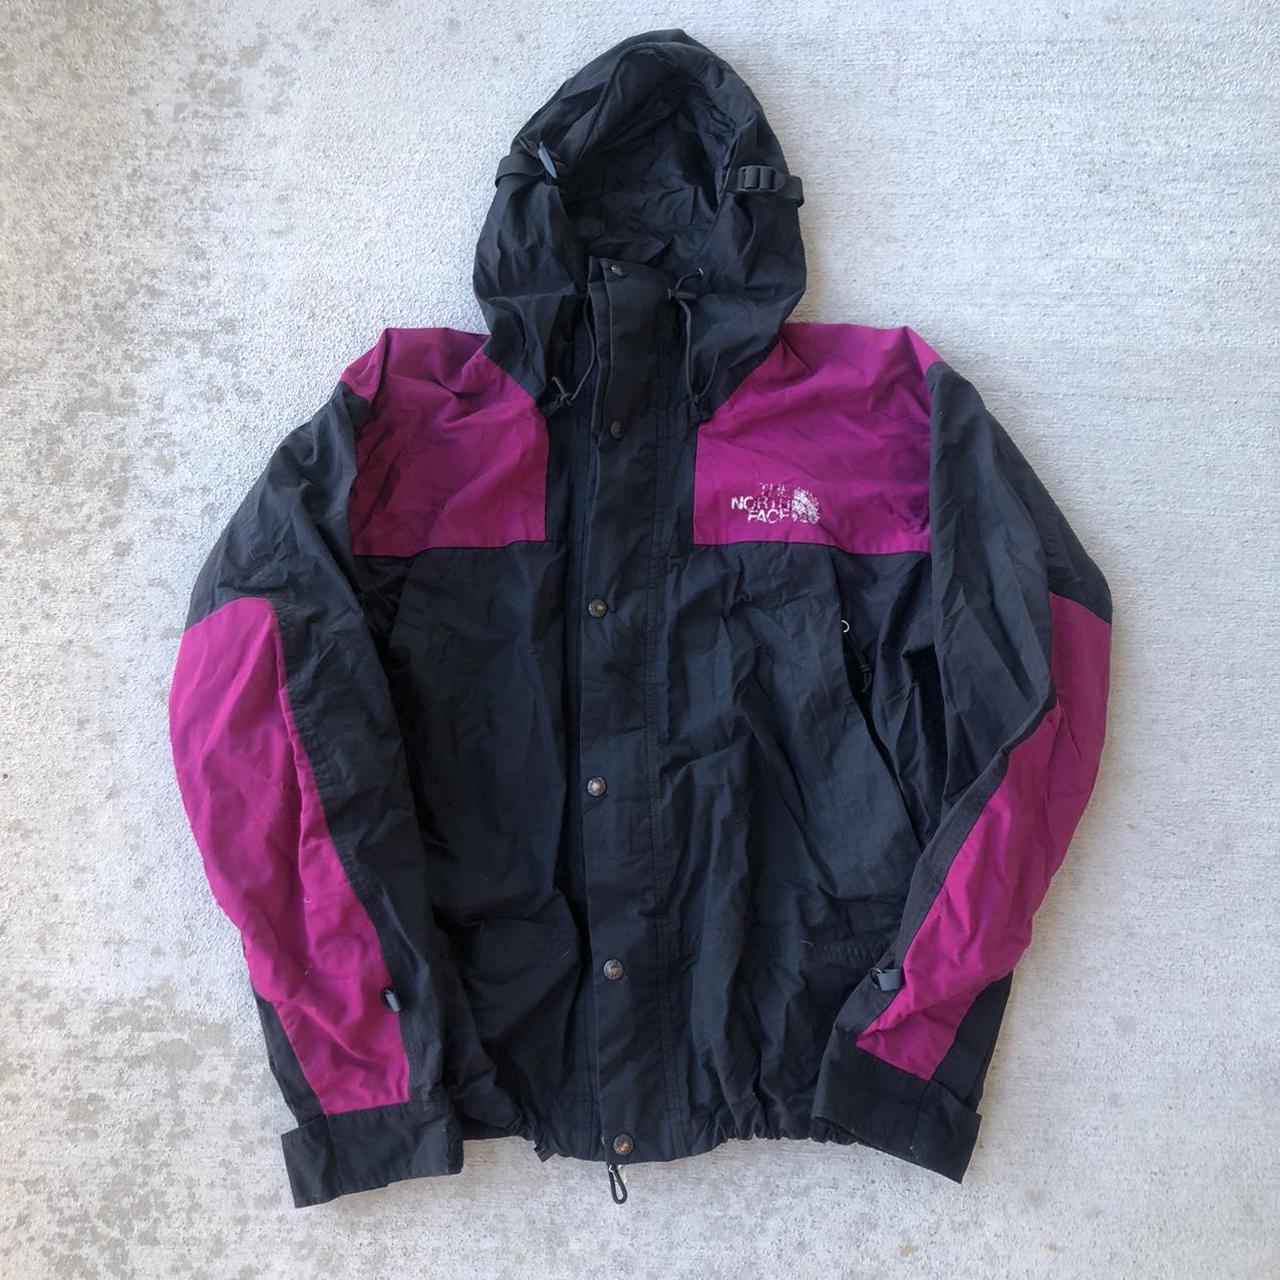 Vintage 90s made in USA north face jacket, in good... - Depop